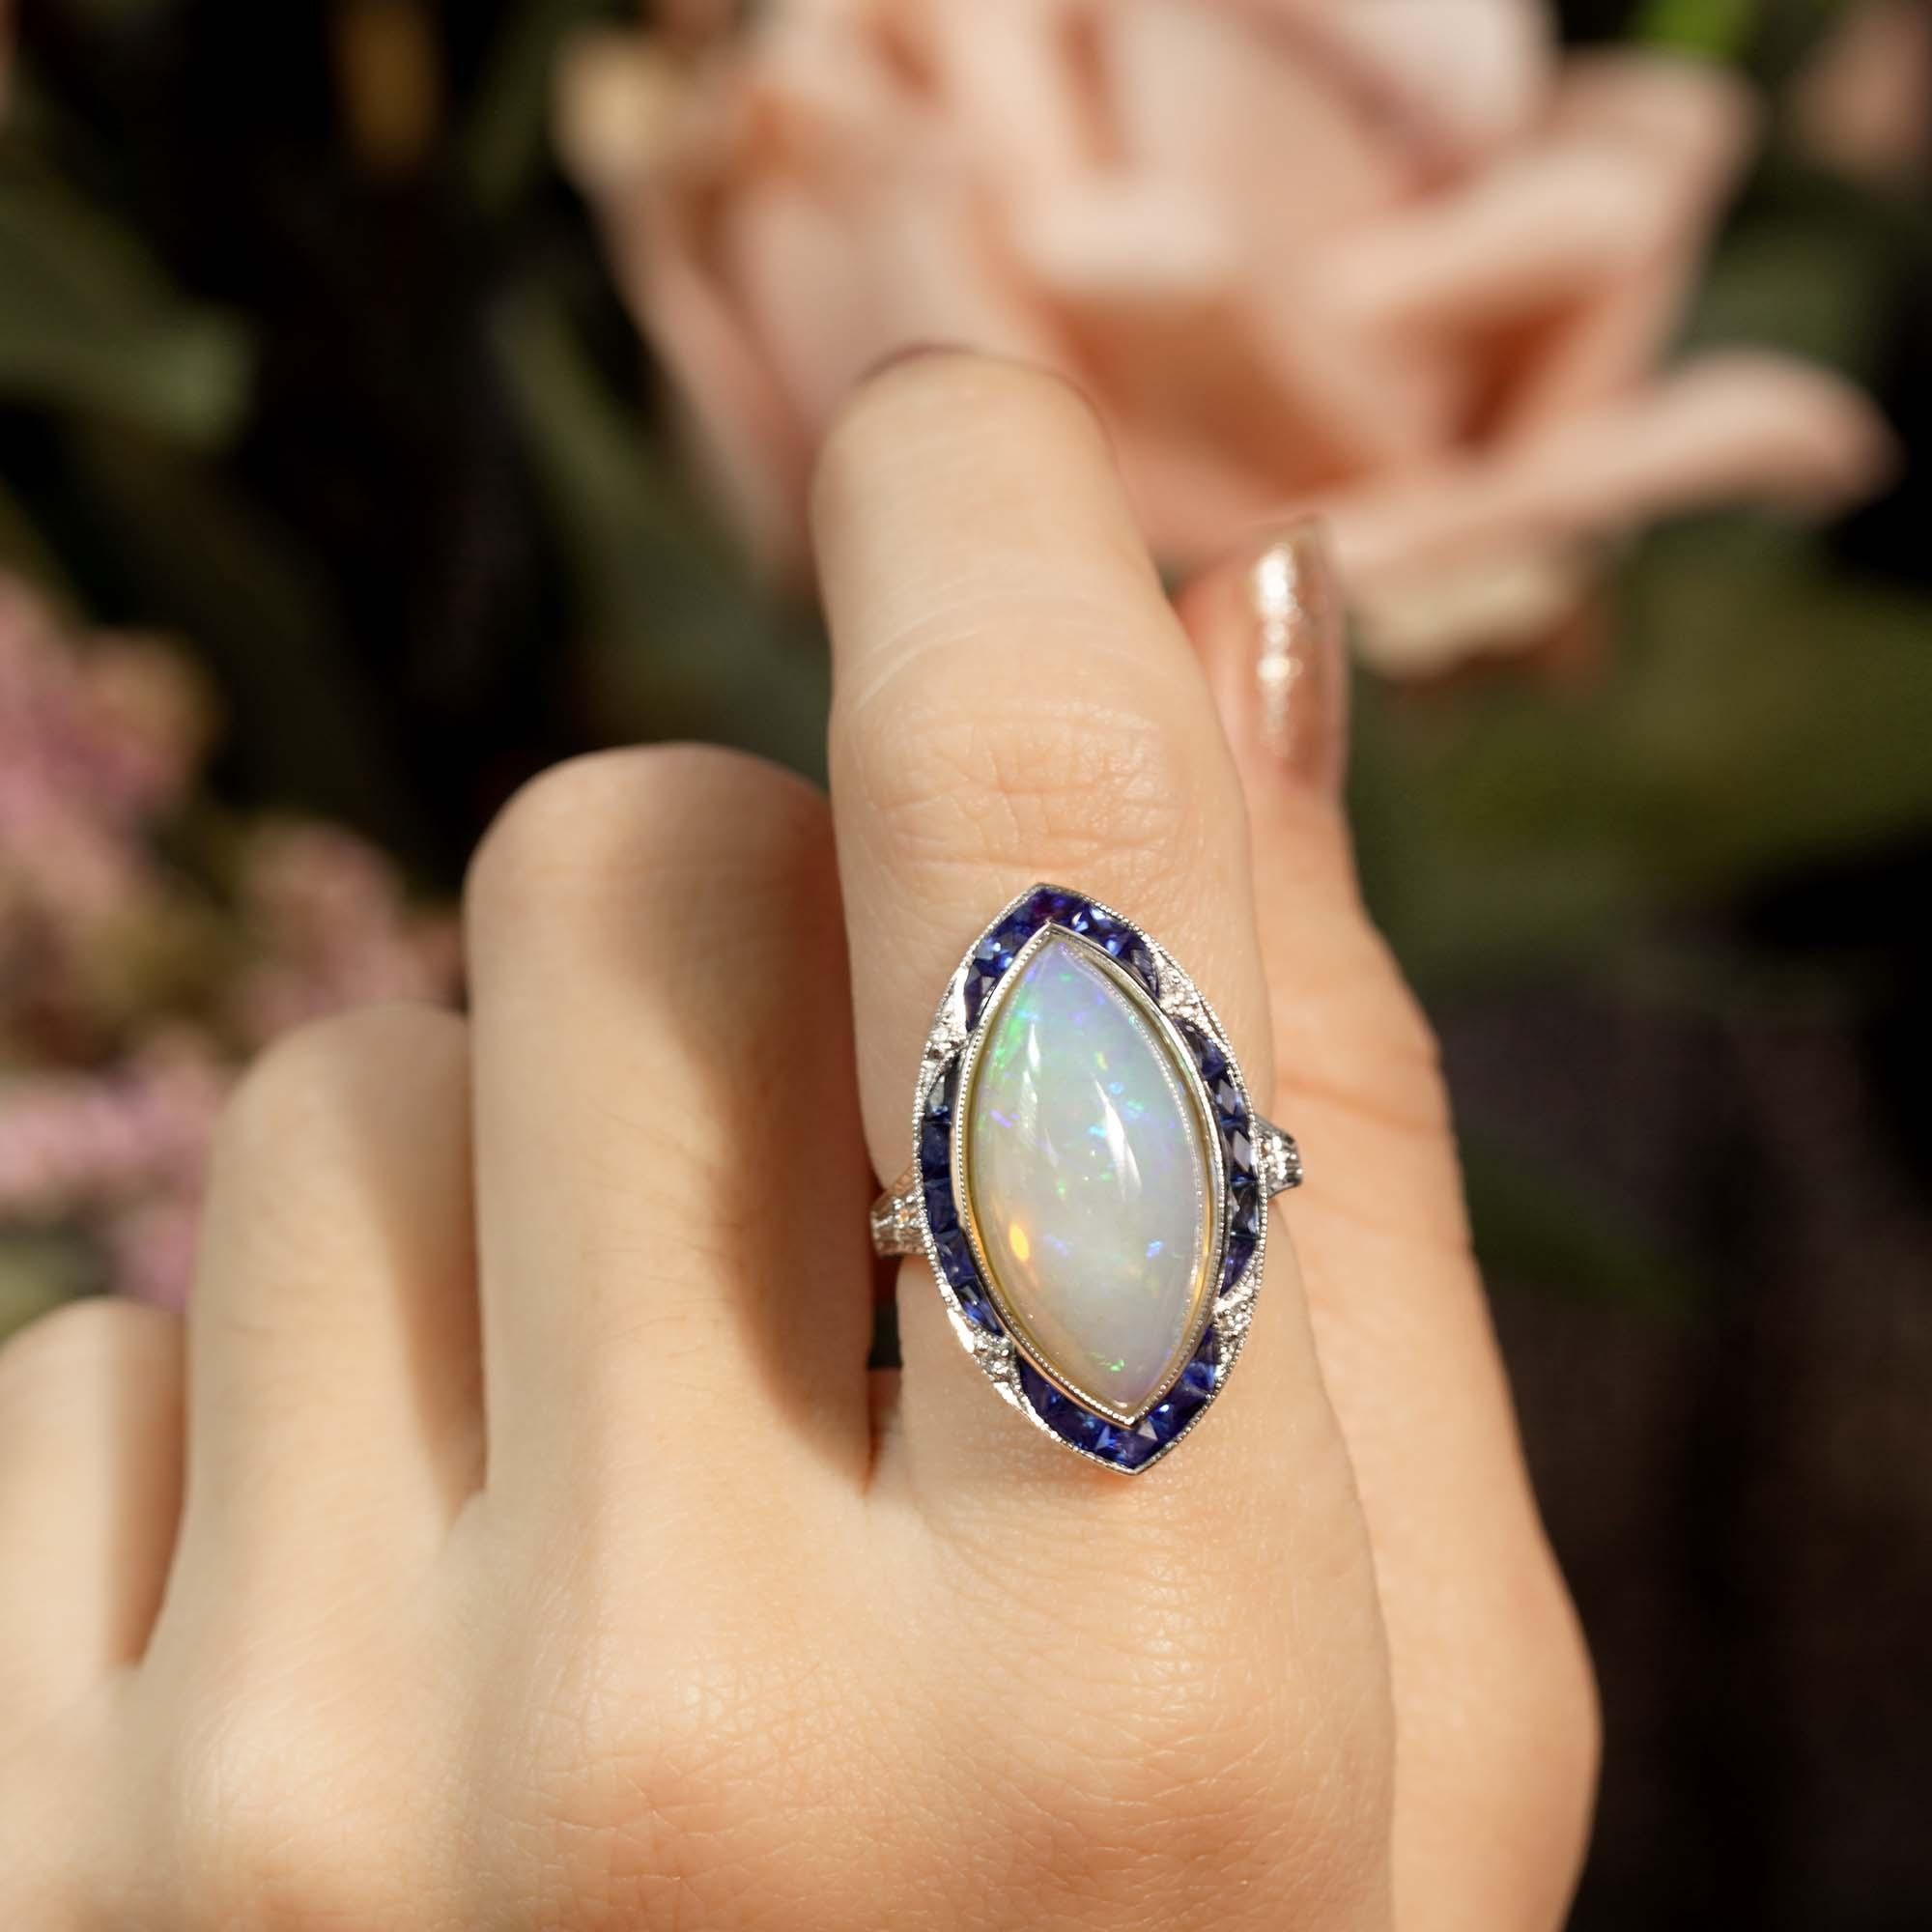 Marquise Cut 6.55 Ct. Opal Blue Sapphire Diamond Art Deco Style Cocktail Ring in 18K Gold